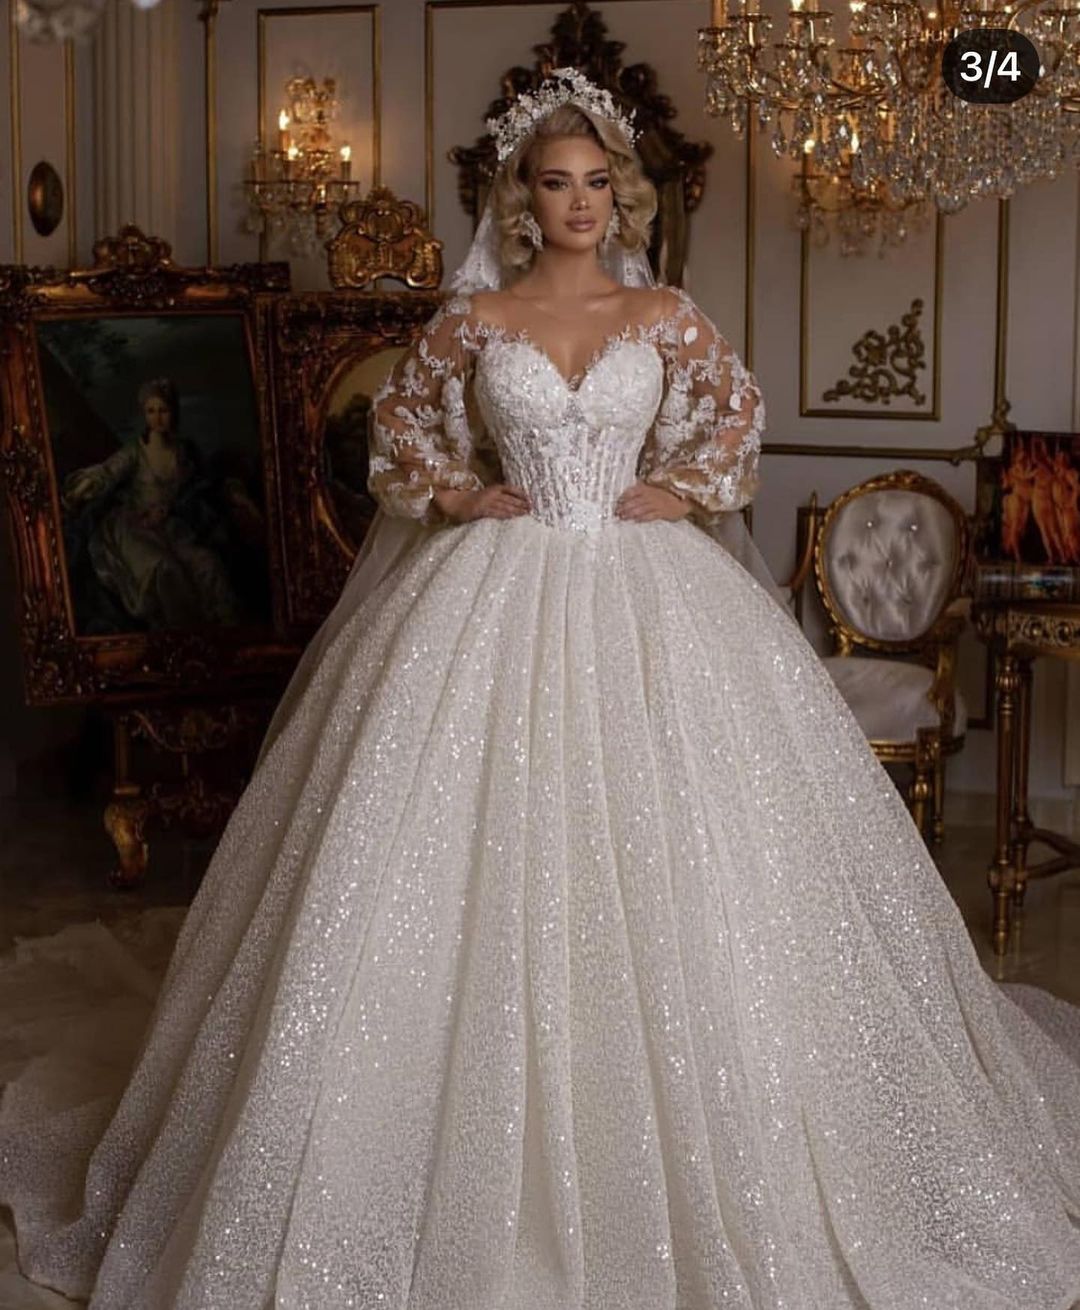 Gorgeous African Huge Ballgown Wedding Dress With Sheer Bateau Neckline,  Illusion Long Sleeves, Lace Appliques, And Puffy Details Cathedral Style  BR318Y From Ouri, $346.74 | DHgate.Com